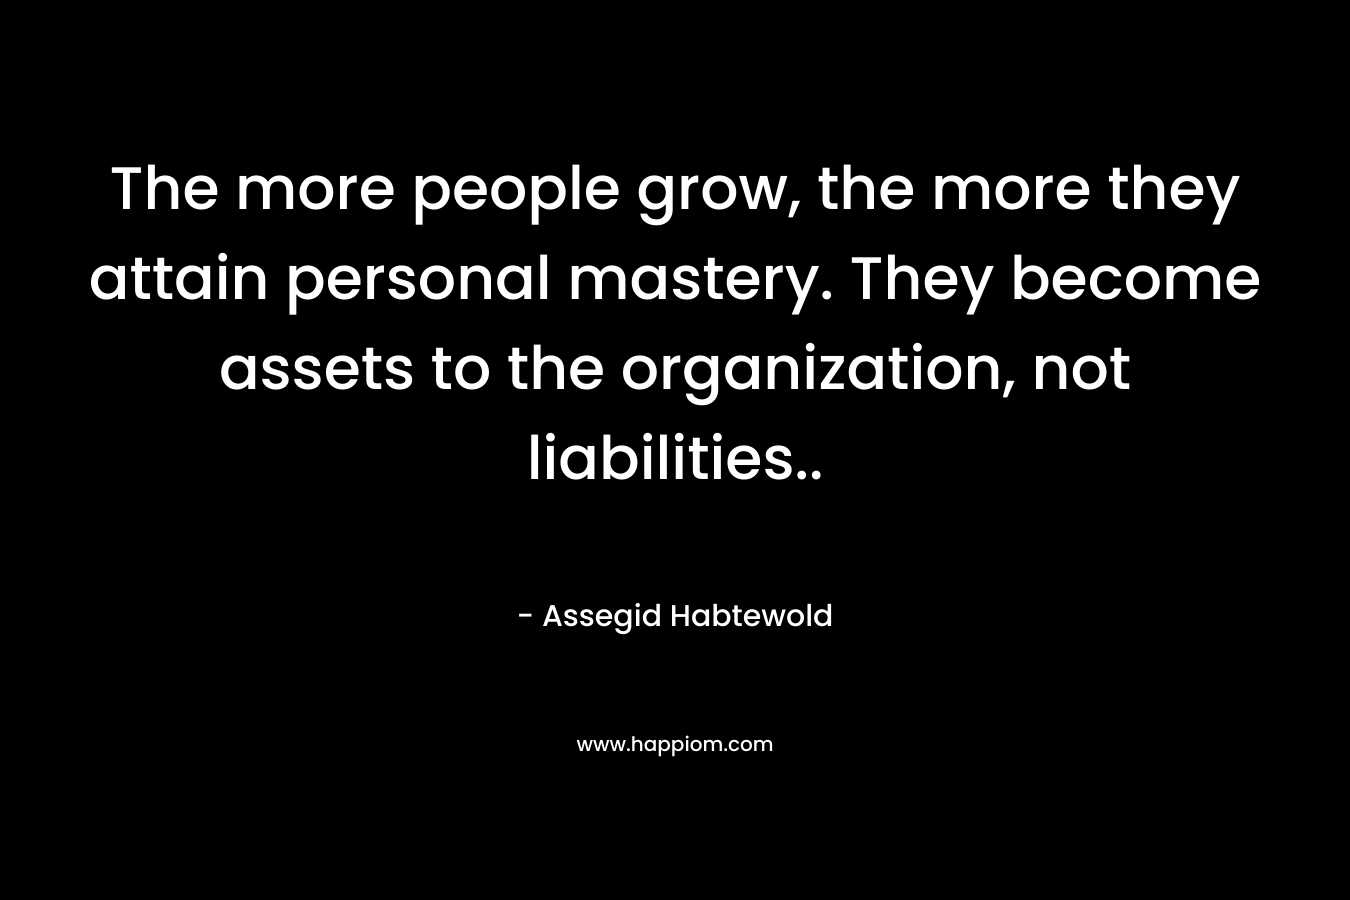 The more people grow, the more they attain personal mastery. They become assets to the organization, not liabilities.. – Assegid Habtewold